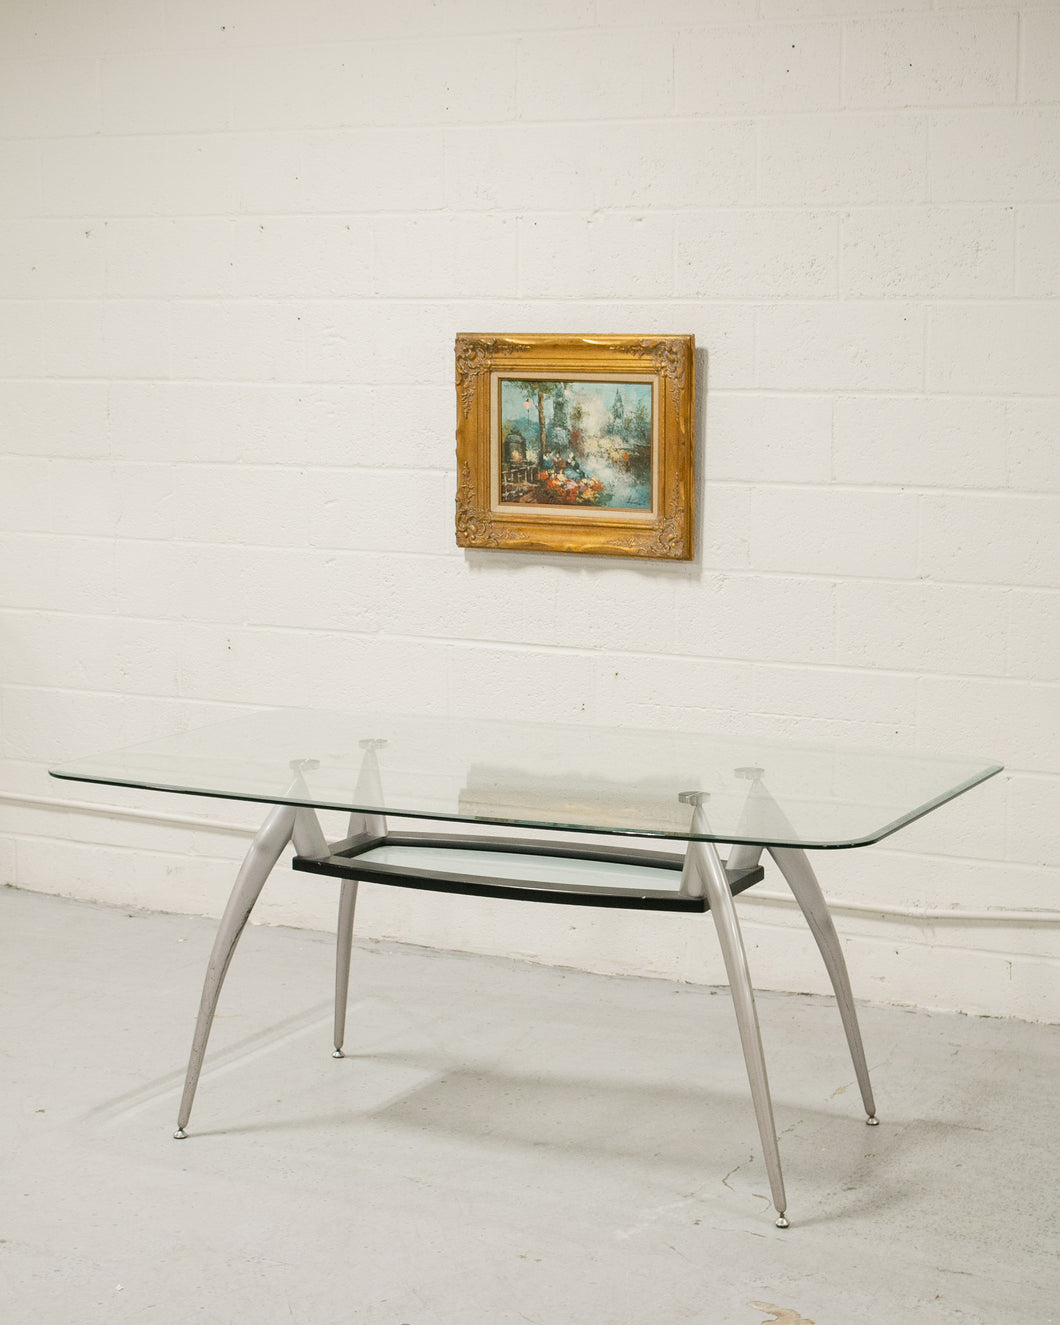 Glass Metal Modern Dining Table